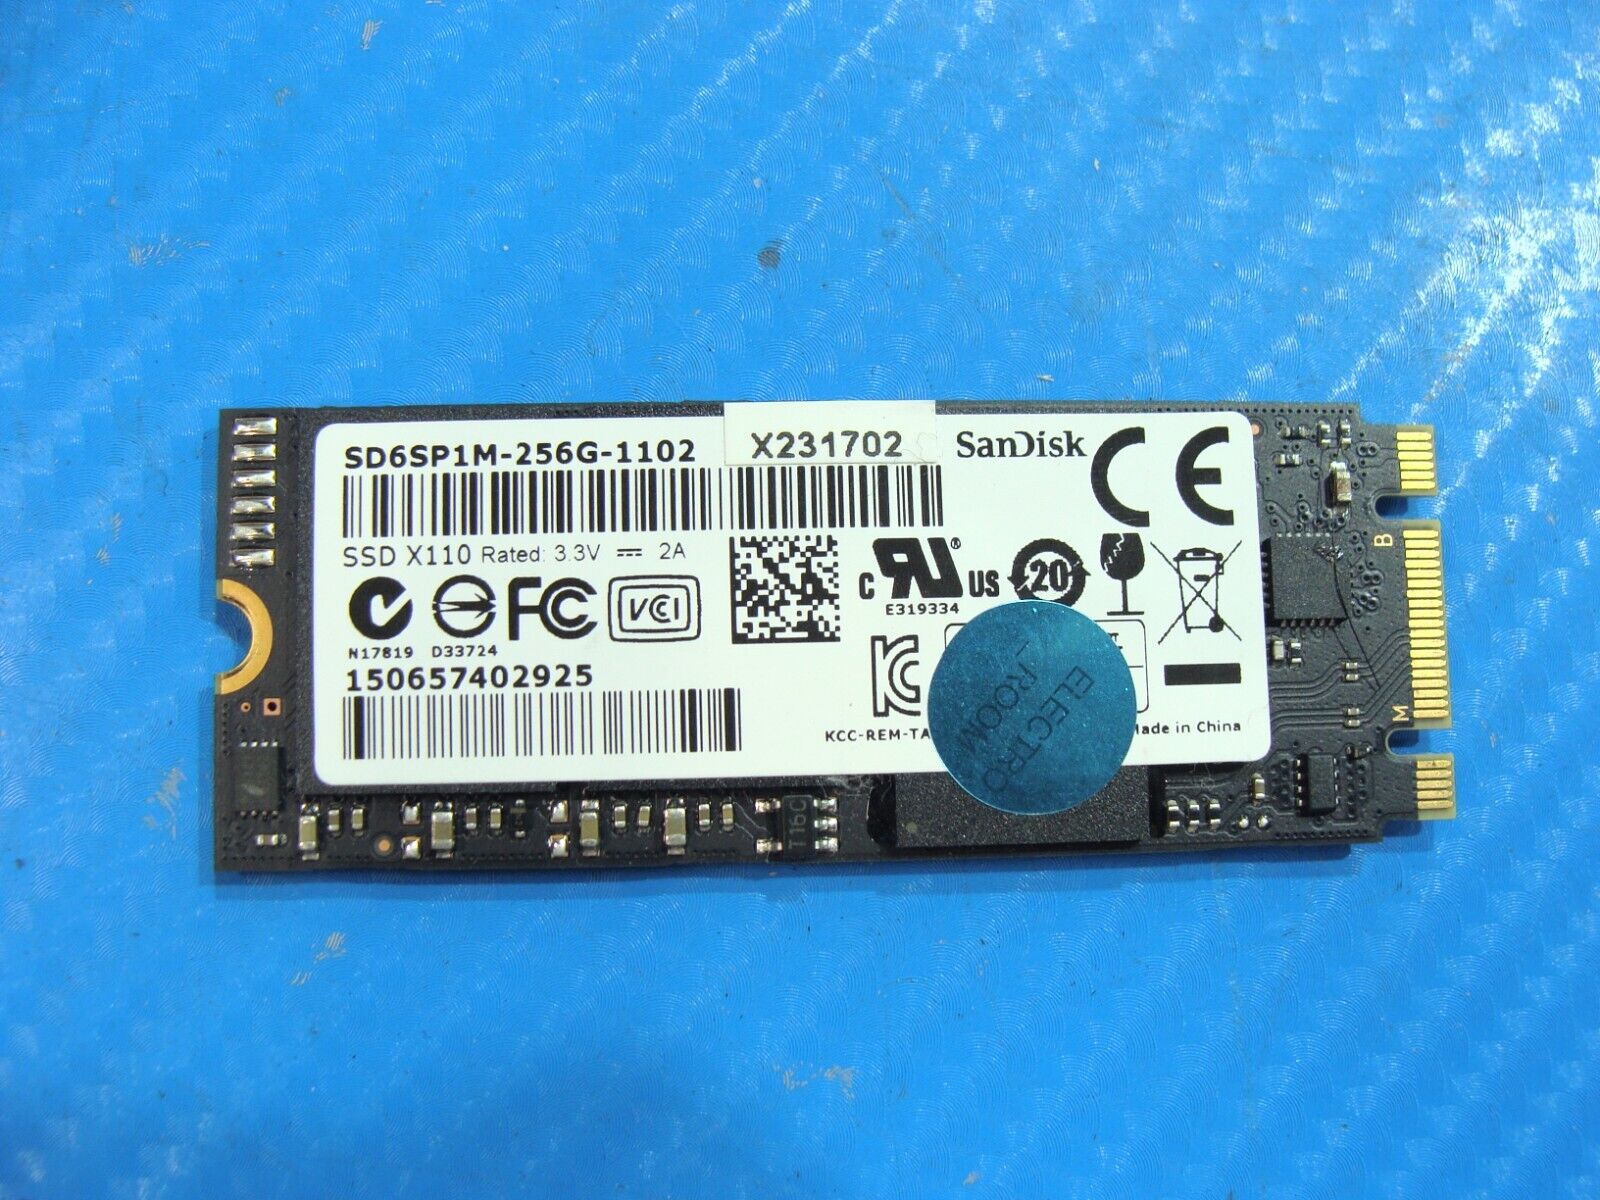 Asus UX301LAB SanDisk SATA M.2 256GB SSD Solid State Drive SD6SP1M-256G-1102